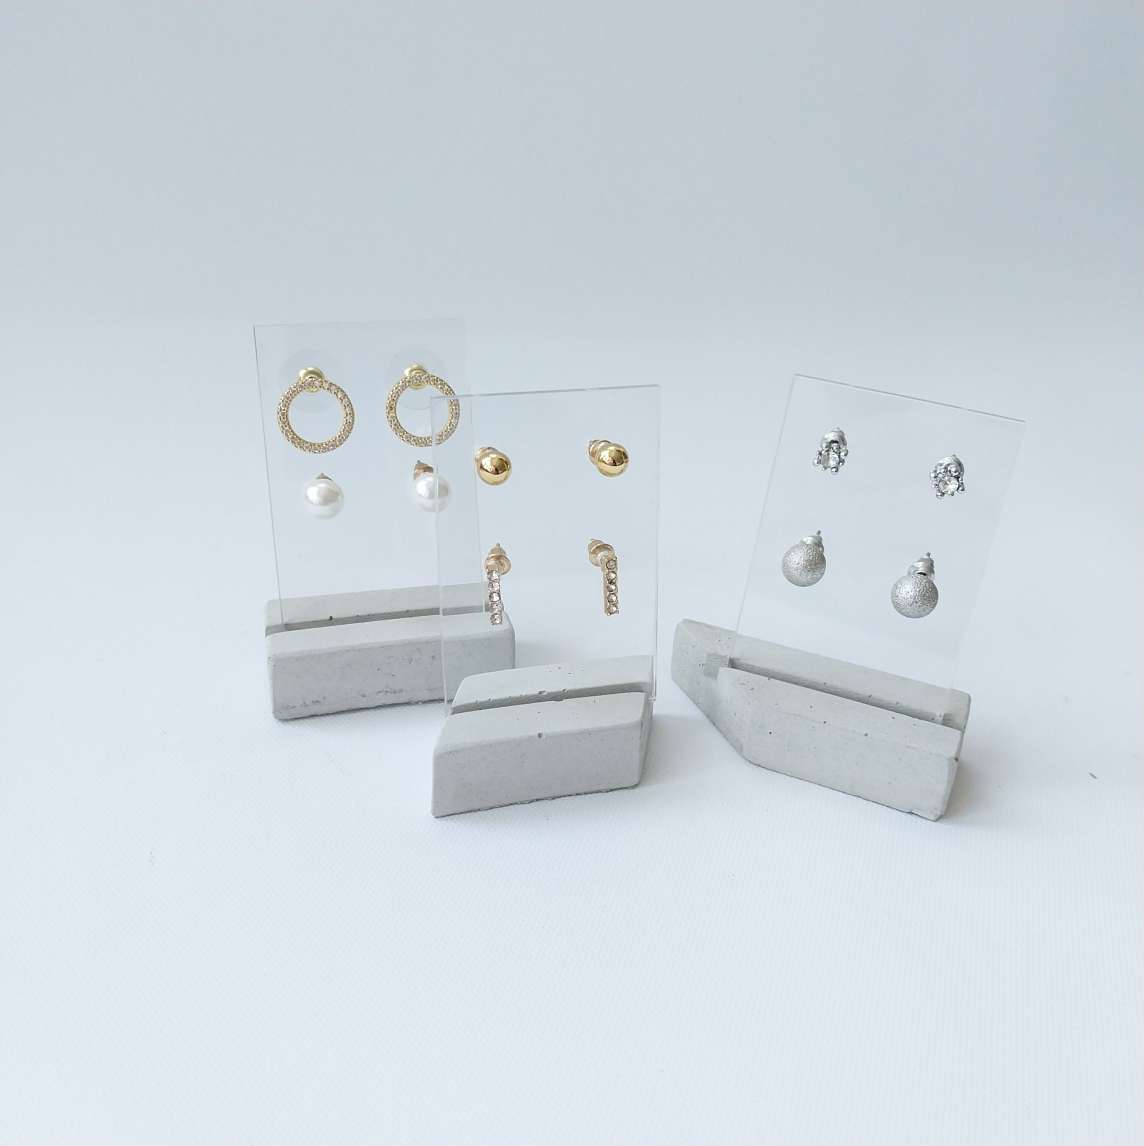 'Big Cathy' Concrete Earring Display, from £9.00